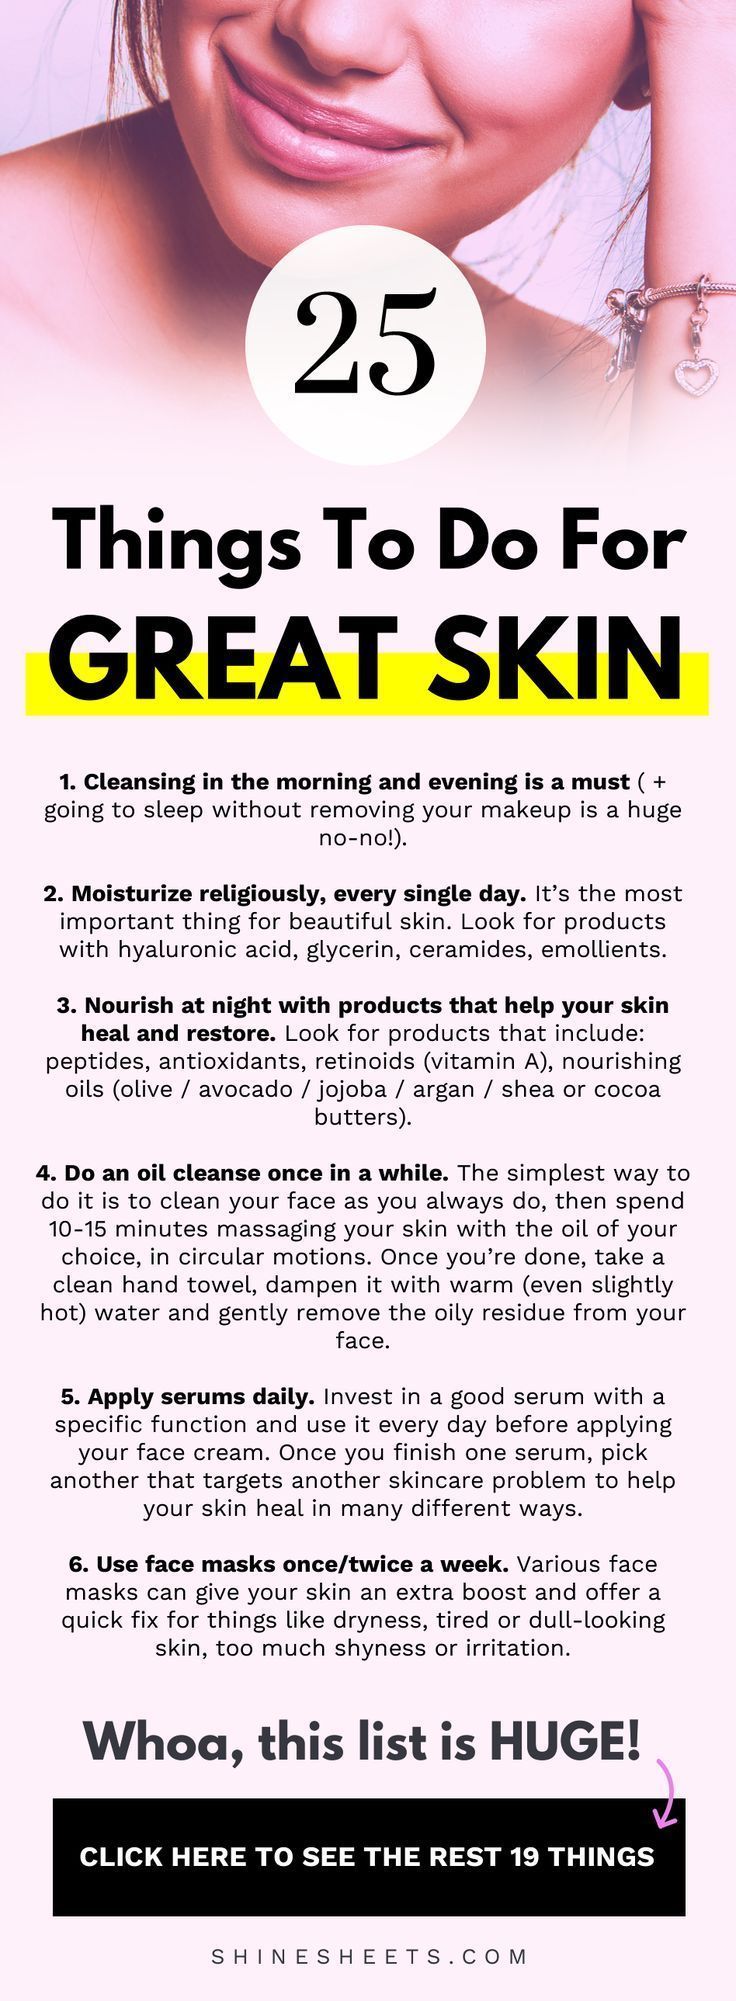 25 Things To Do For Stunning Skin | ShineSheets -   19 beauty Tips products ideas